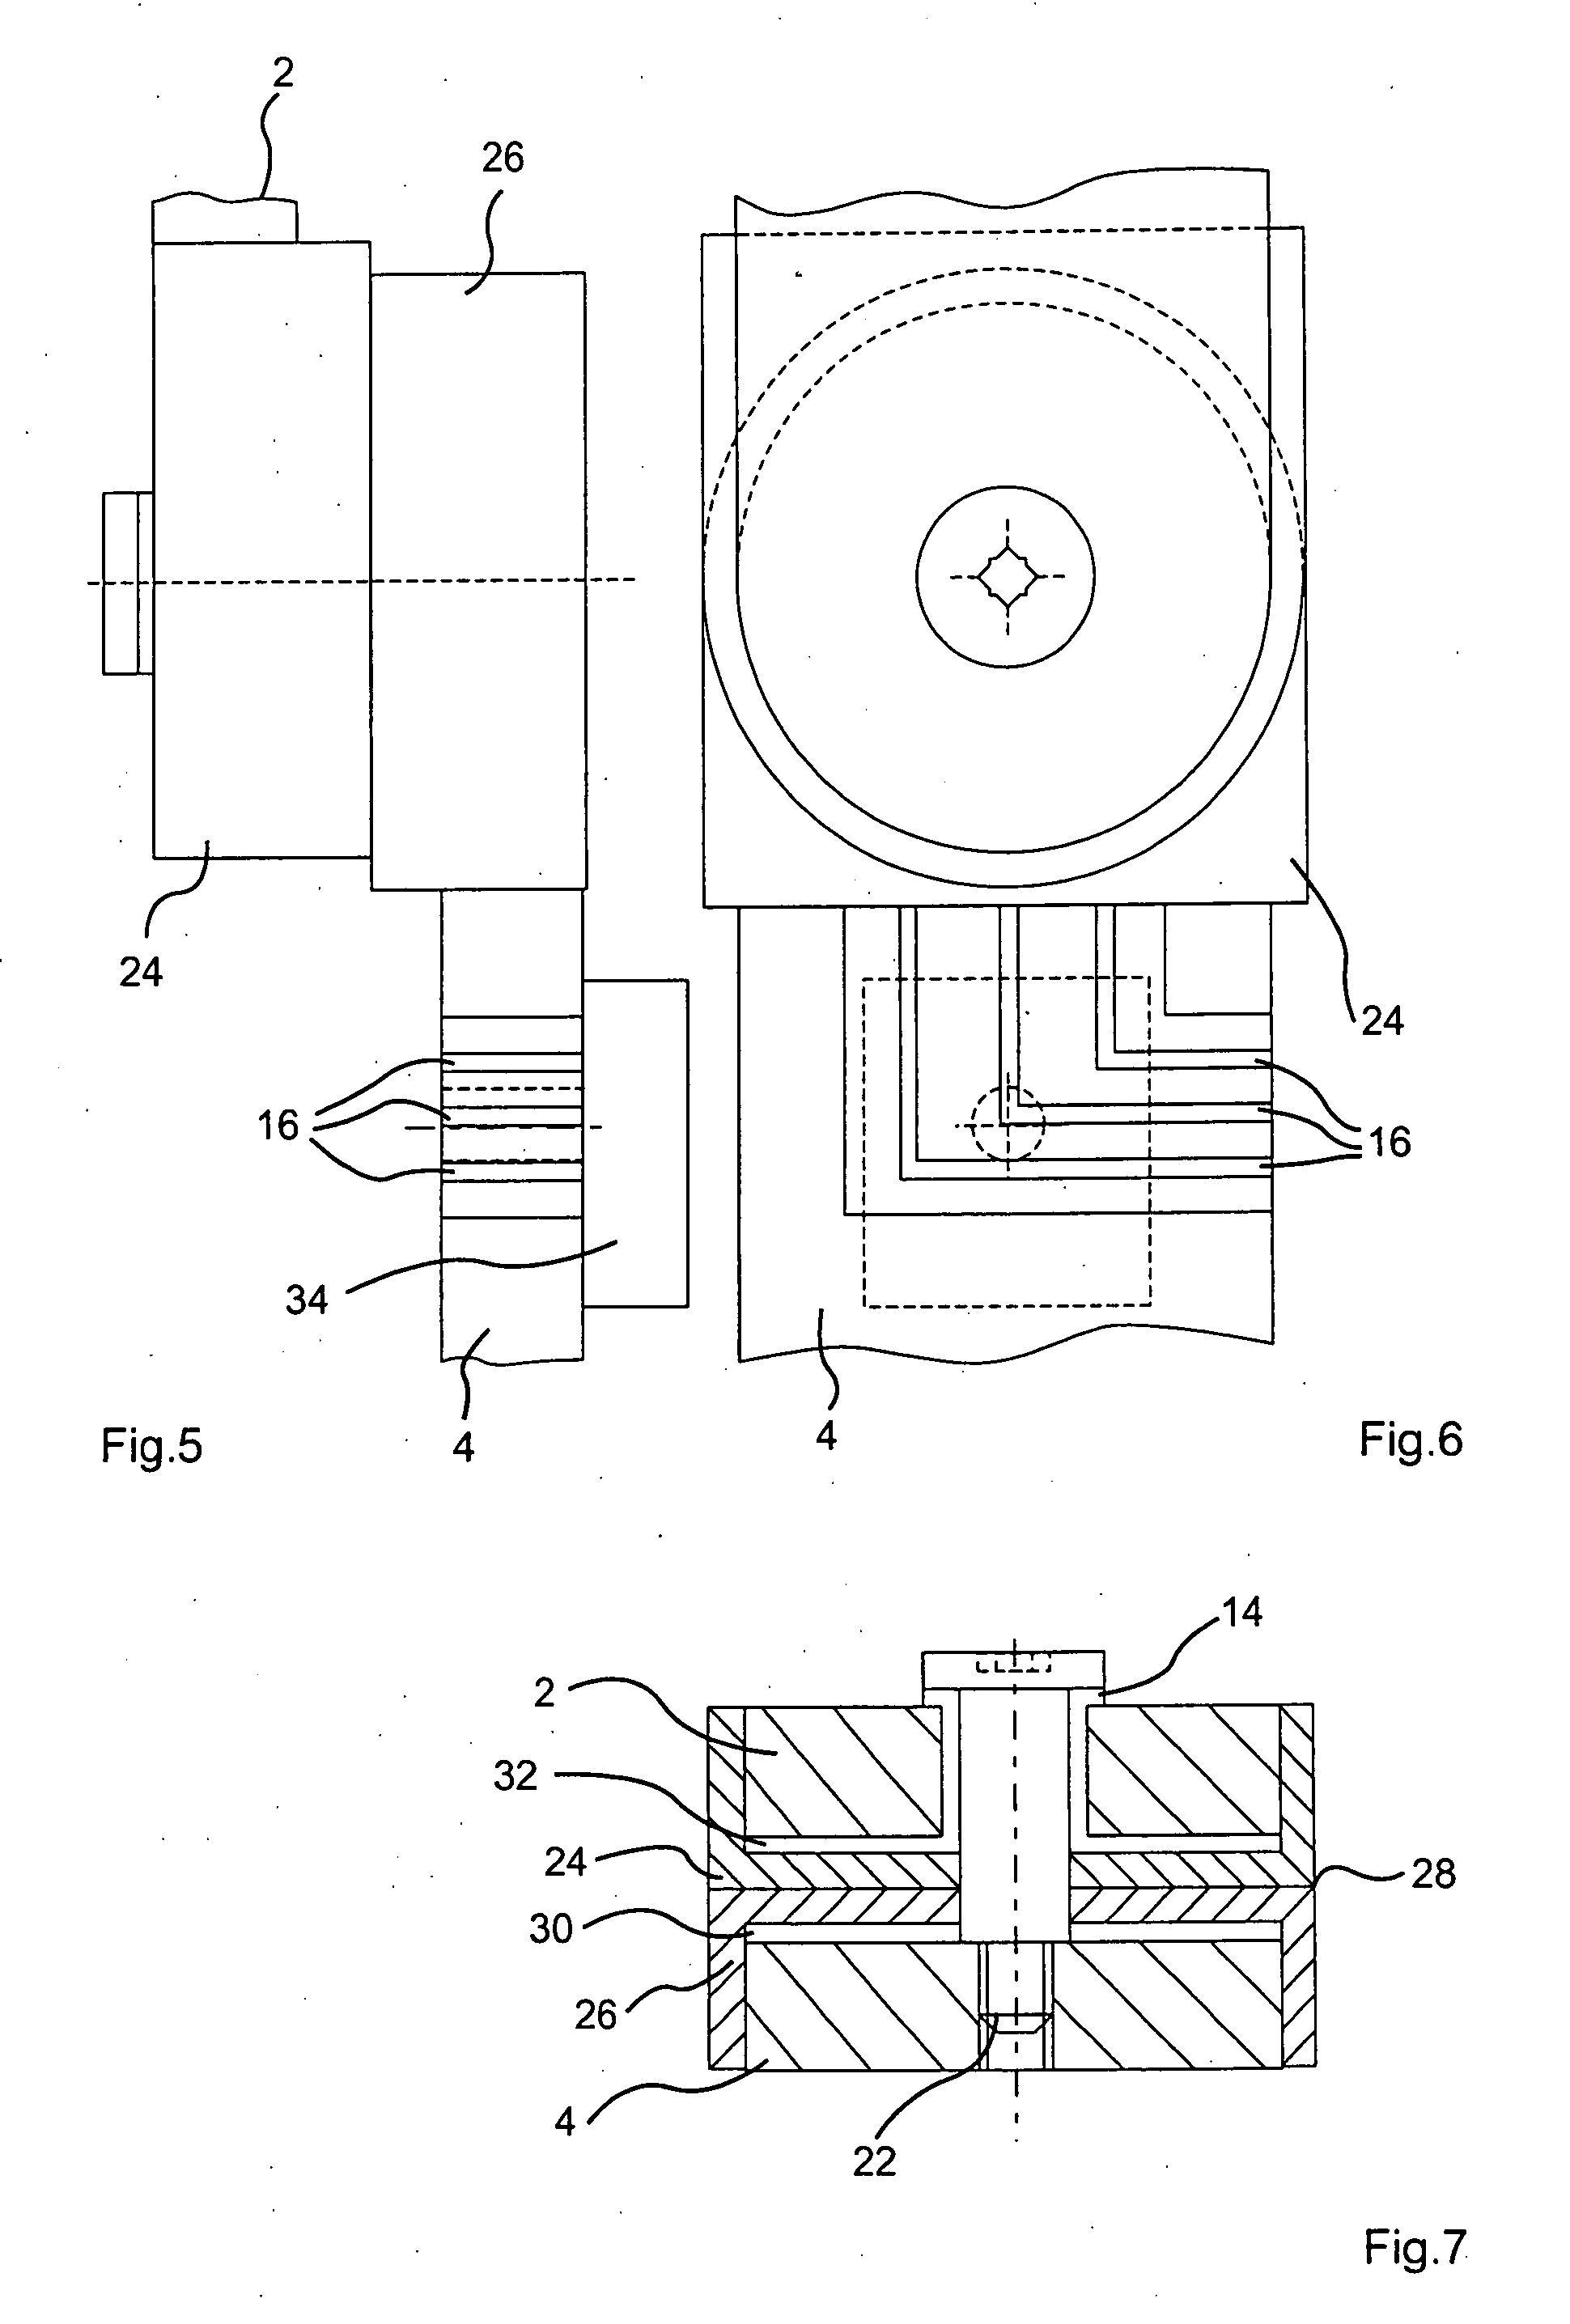 Convertible top with a rotational angle detection device